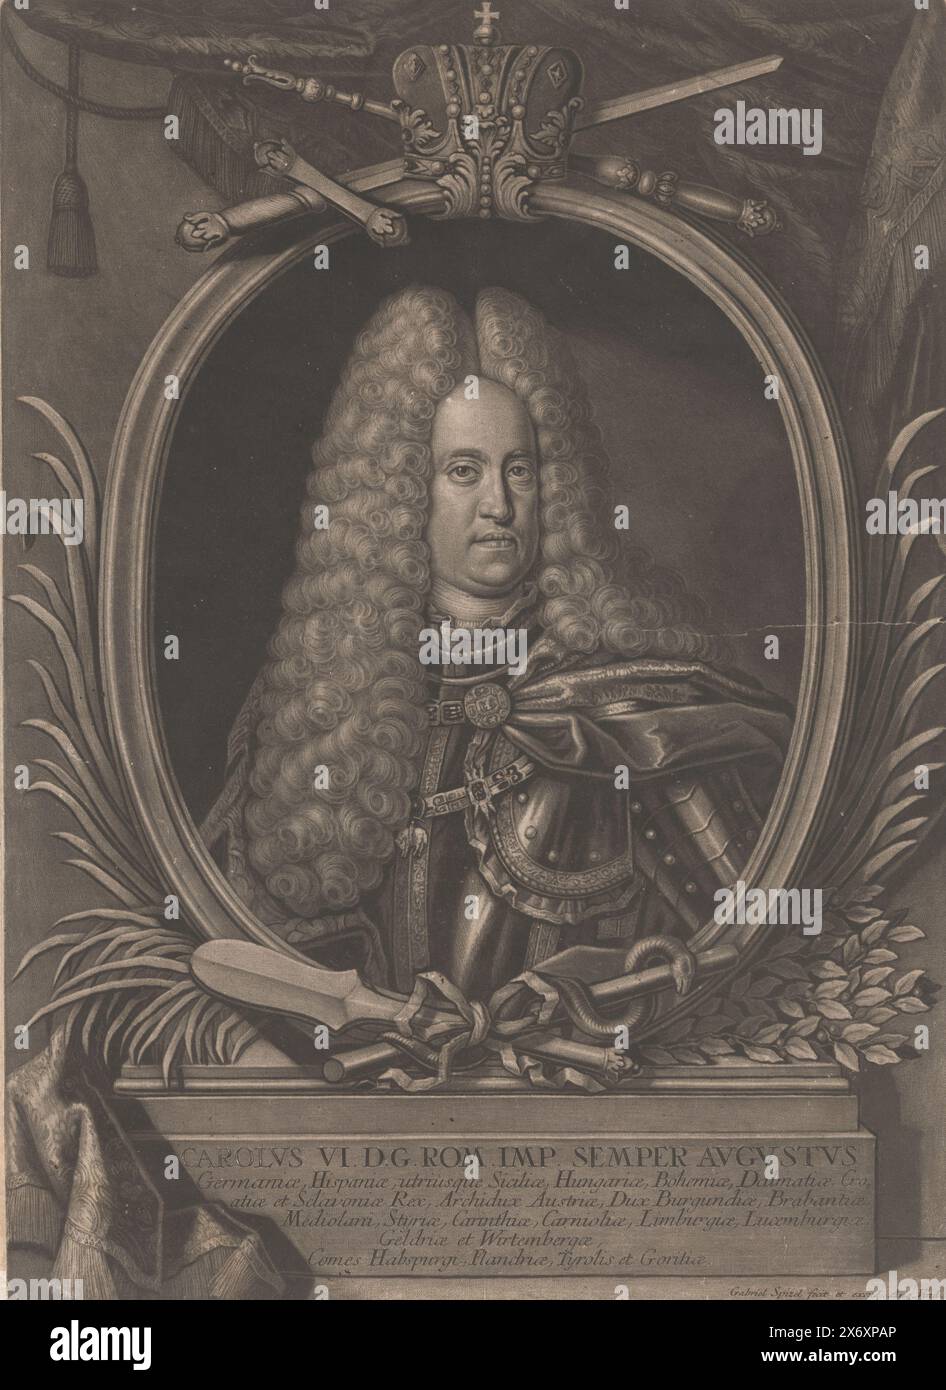 Portrait of Charles VI, Emperor of the Holy Roman Empire, print, print maker: Gabriel Spitzel, (mentioned on object), publisher: Gabriel Spitzel, (mentioned on object), Augsburg, 1711 - 1760, paper, height, 497 mm × width, 362 mm Stock Photo